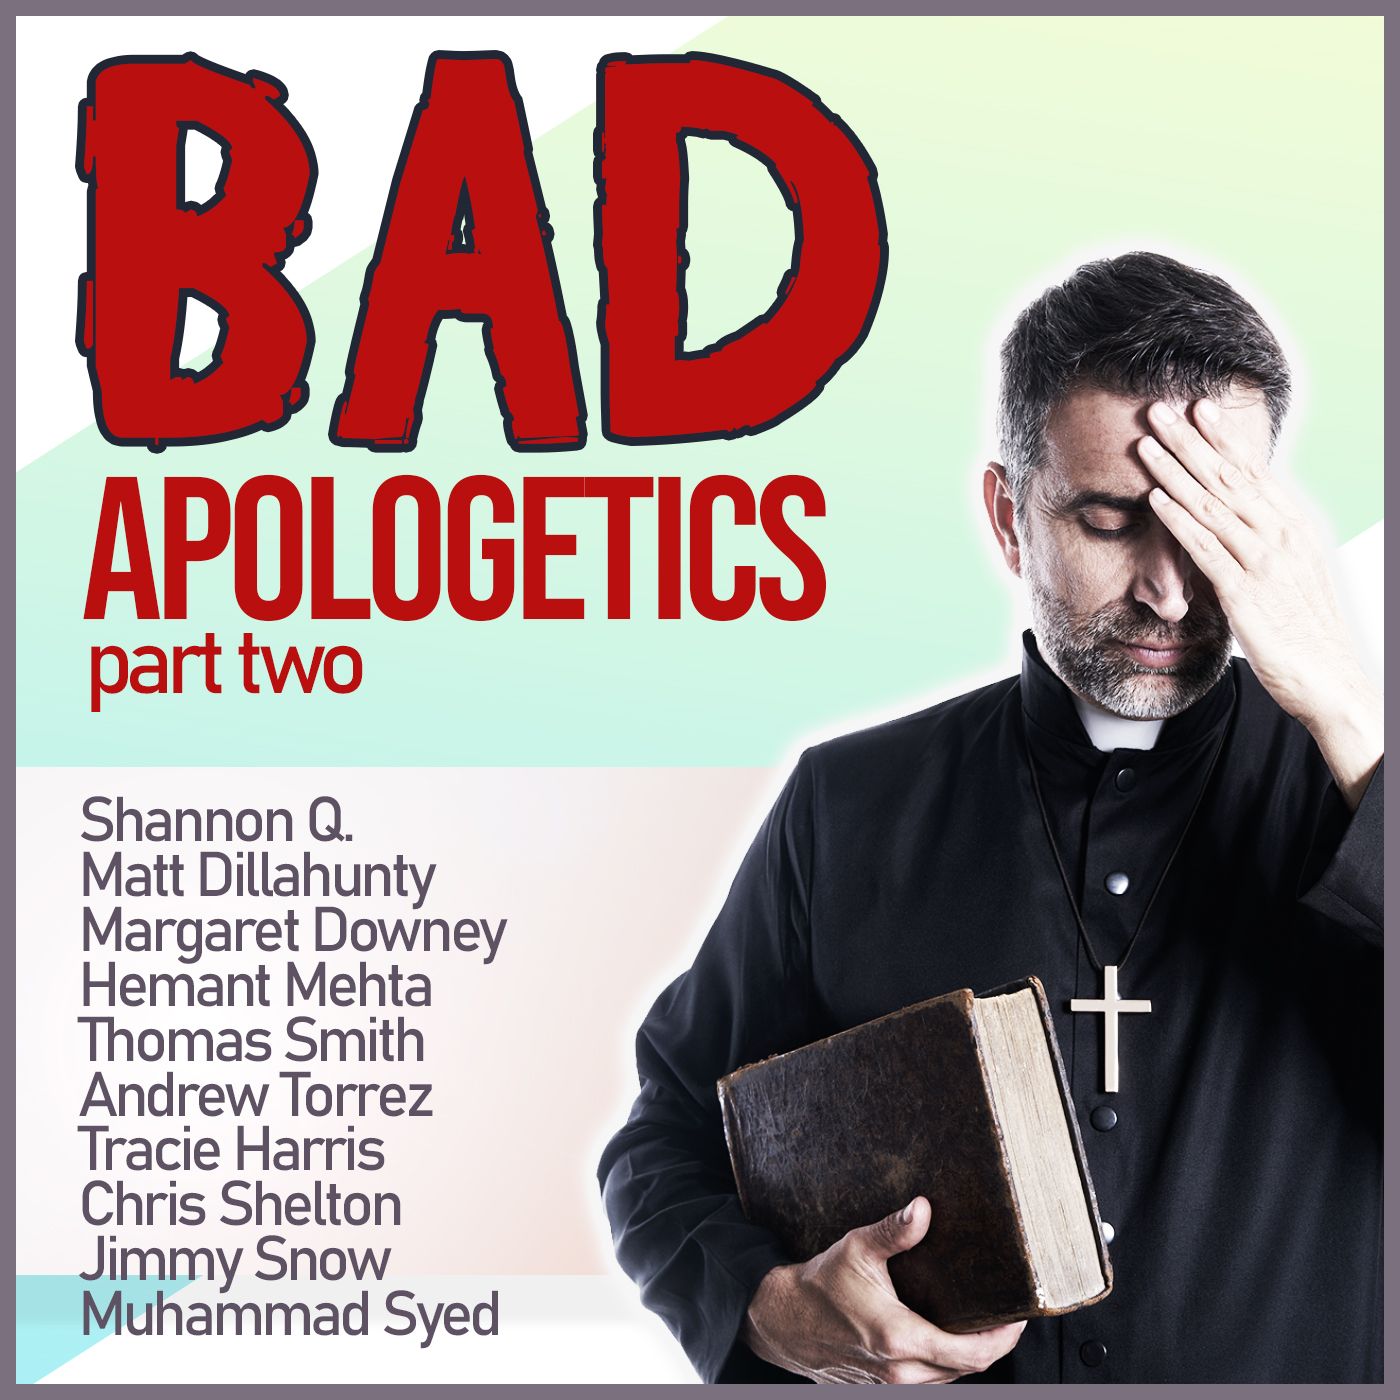 Bad Apologetics: The Arguments We’re Most Weary Of (PART TWO)